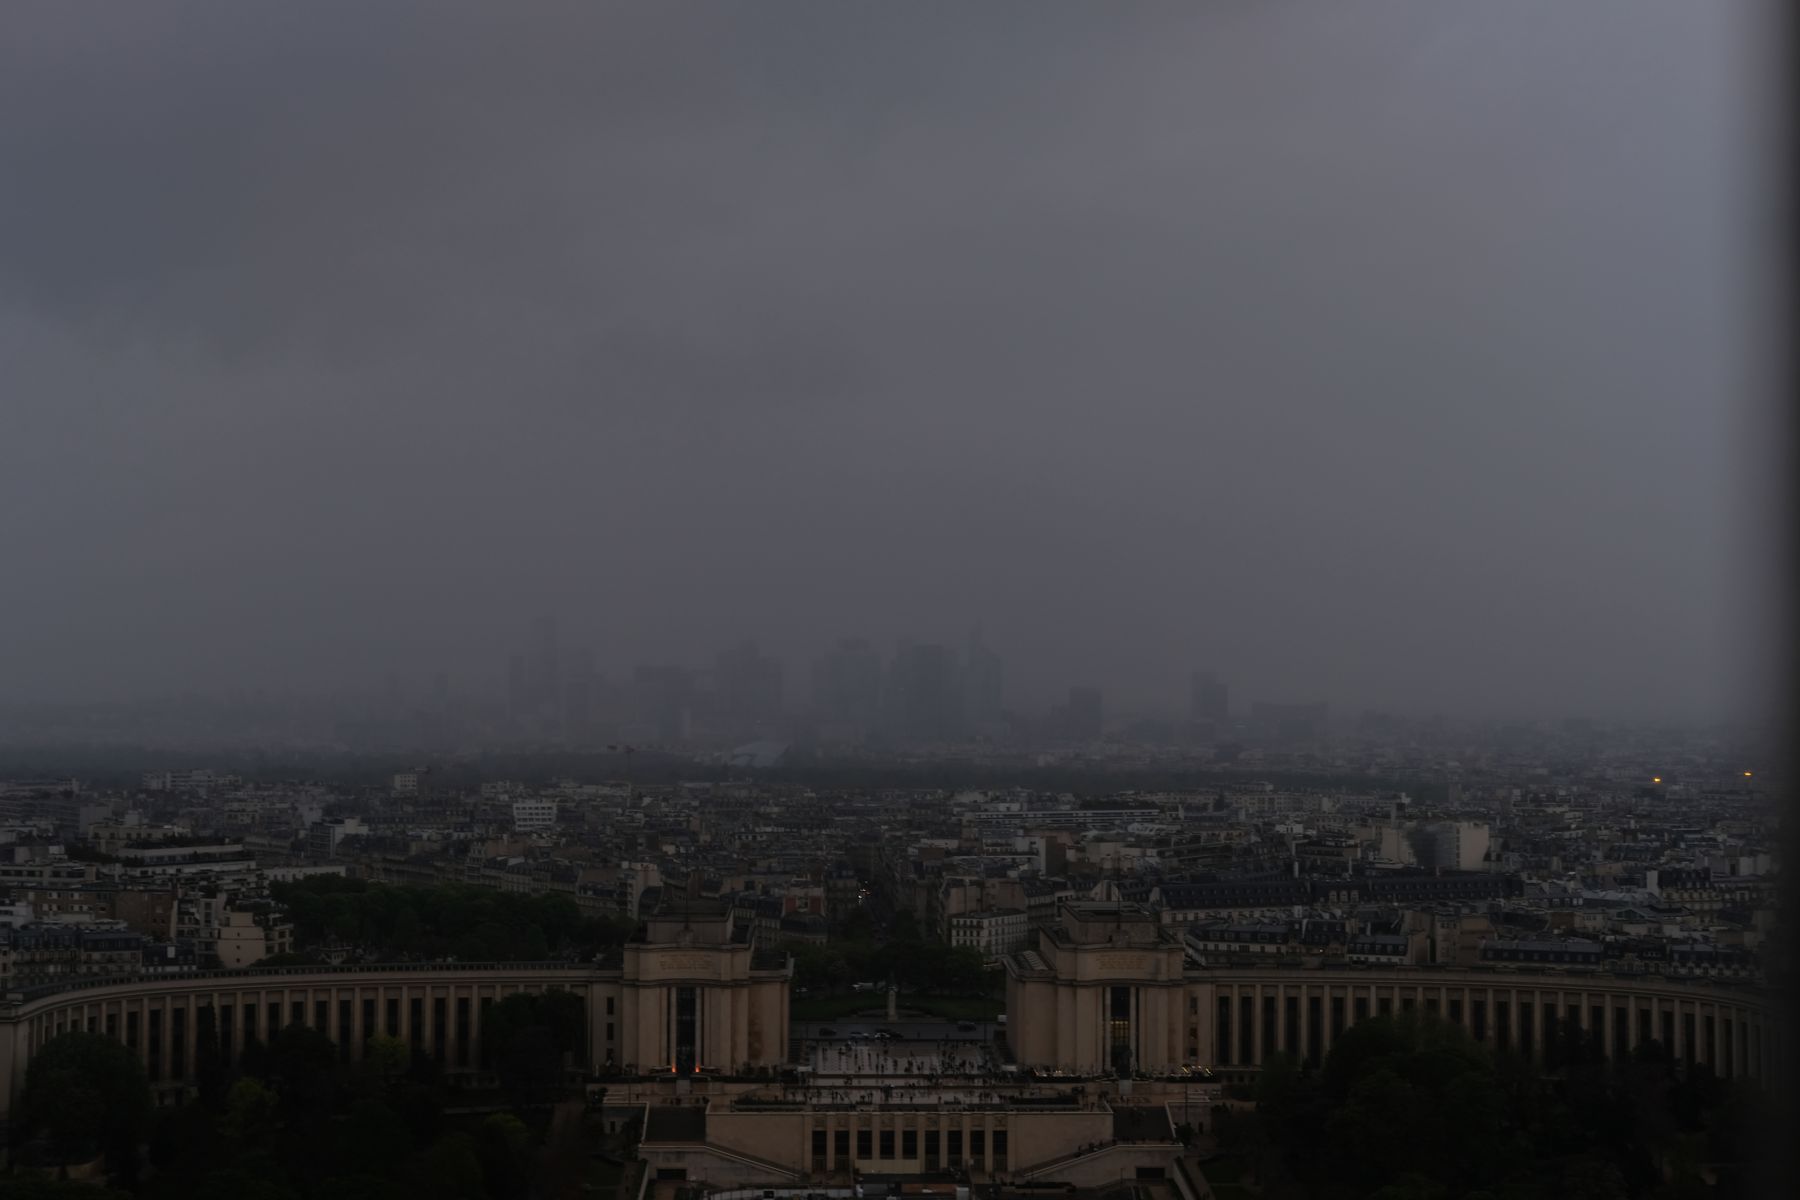 And, just for the heck of it, an ugly sort of apocalyptic photo of Paris.